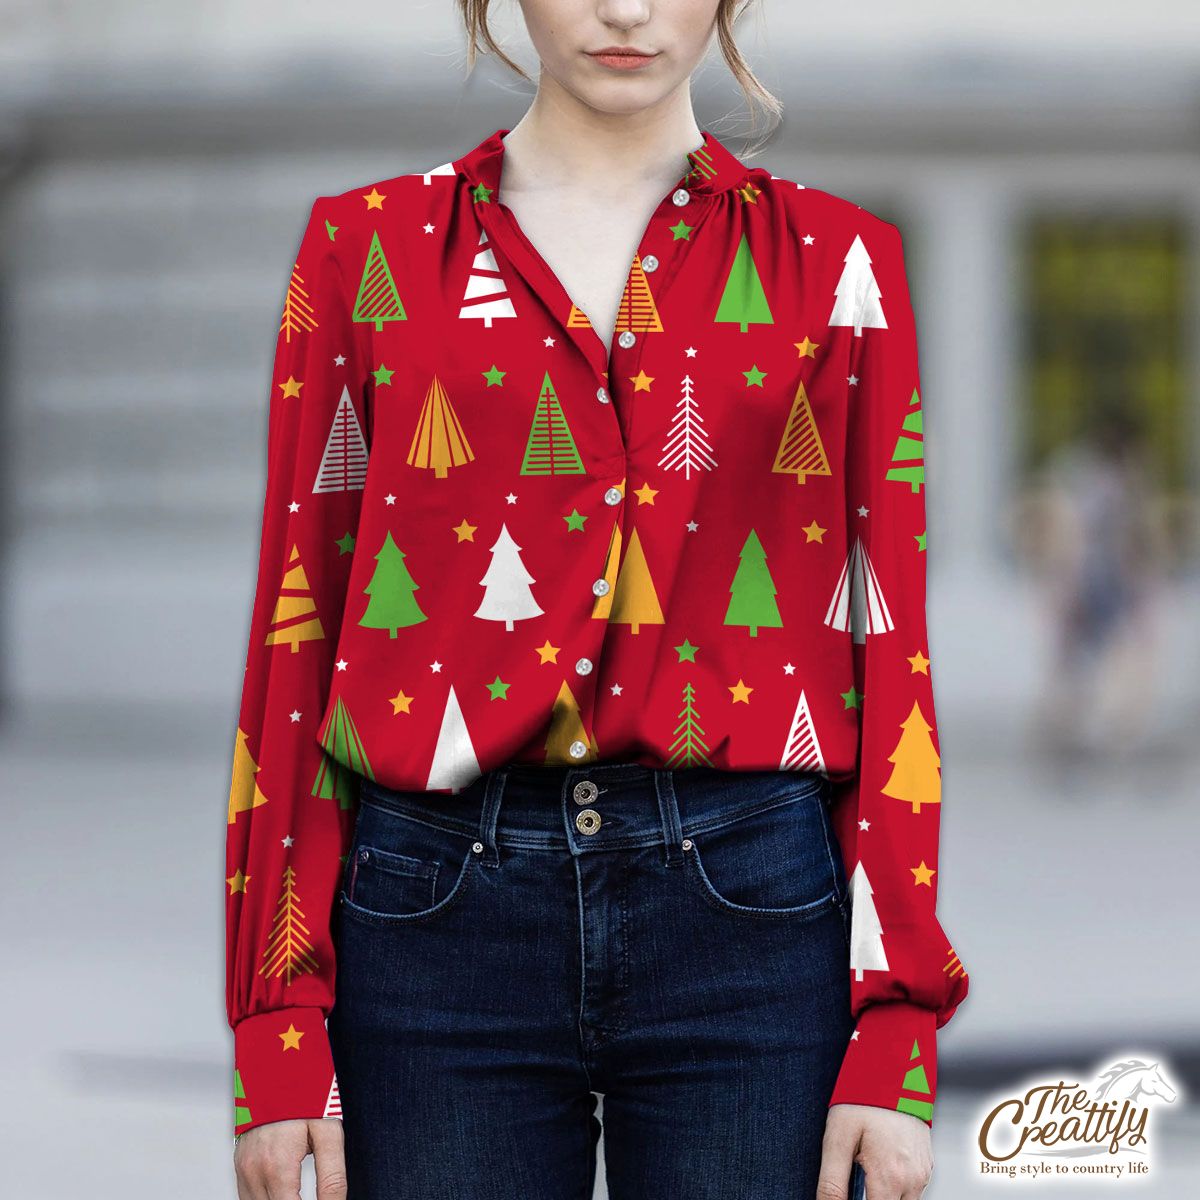 Red Green And White Christmas Tree With Star V-Neckline Blouses